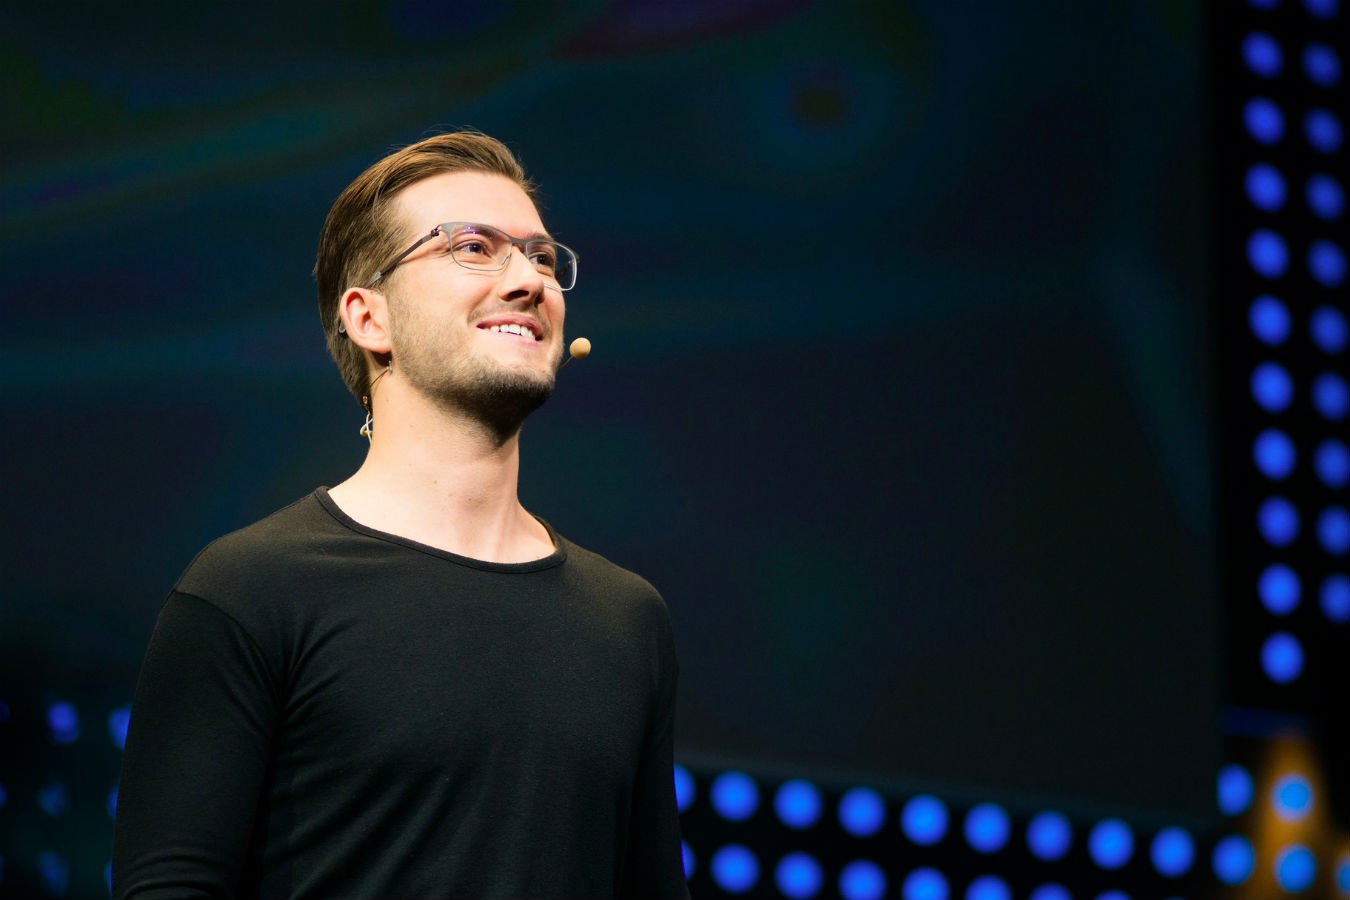 SoundCloud CEO answer the audience's question at tech conference